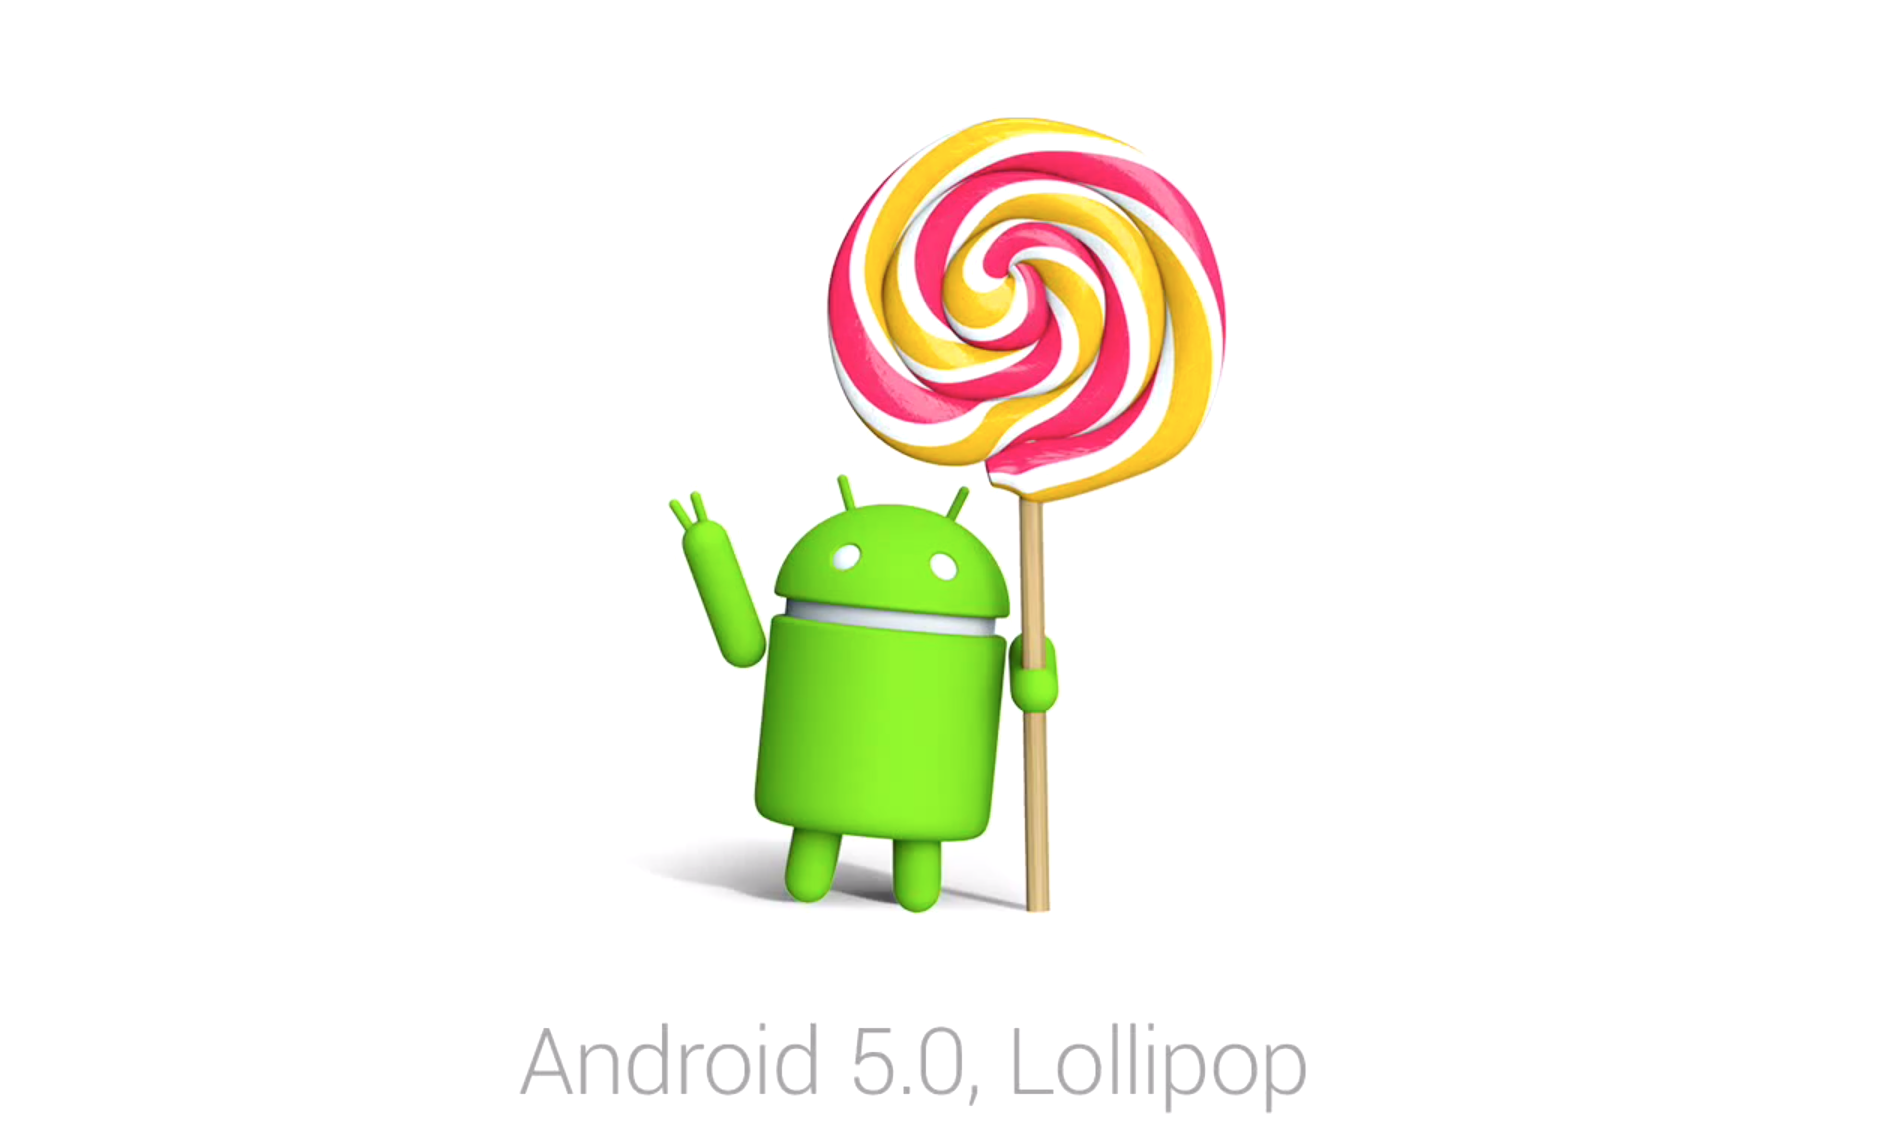 Google-officially-released-Android-5.0-Lollipop-source-code-into-the-AOSP-Details.png